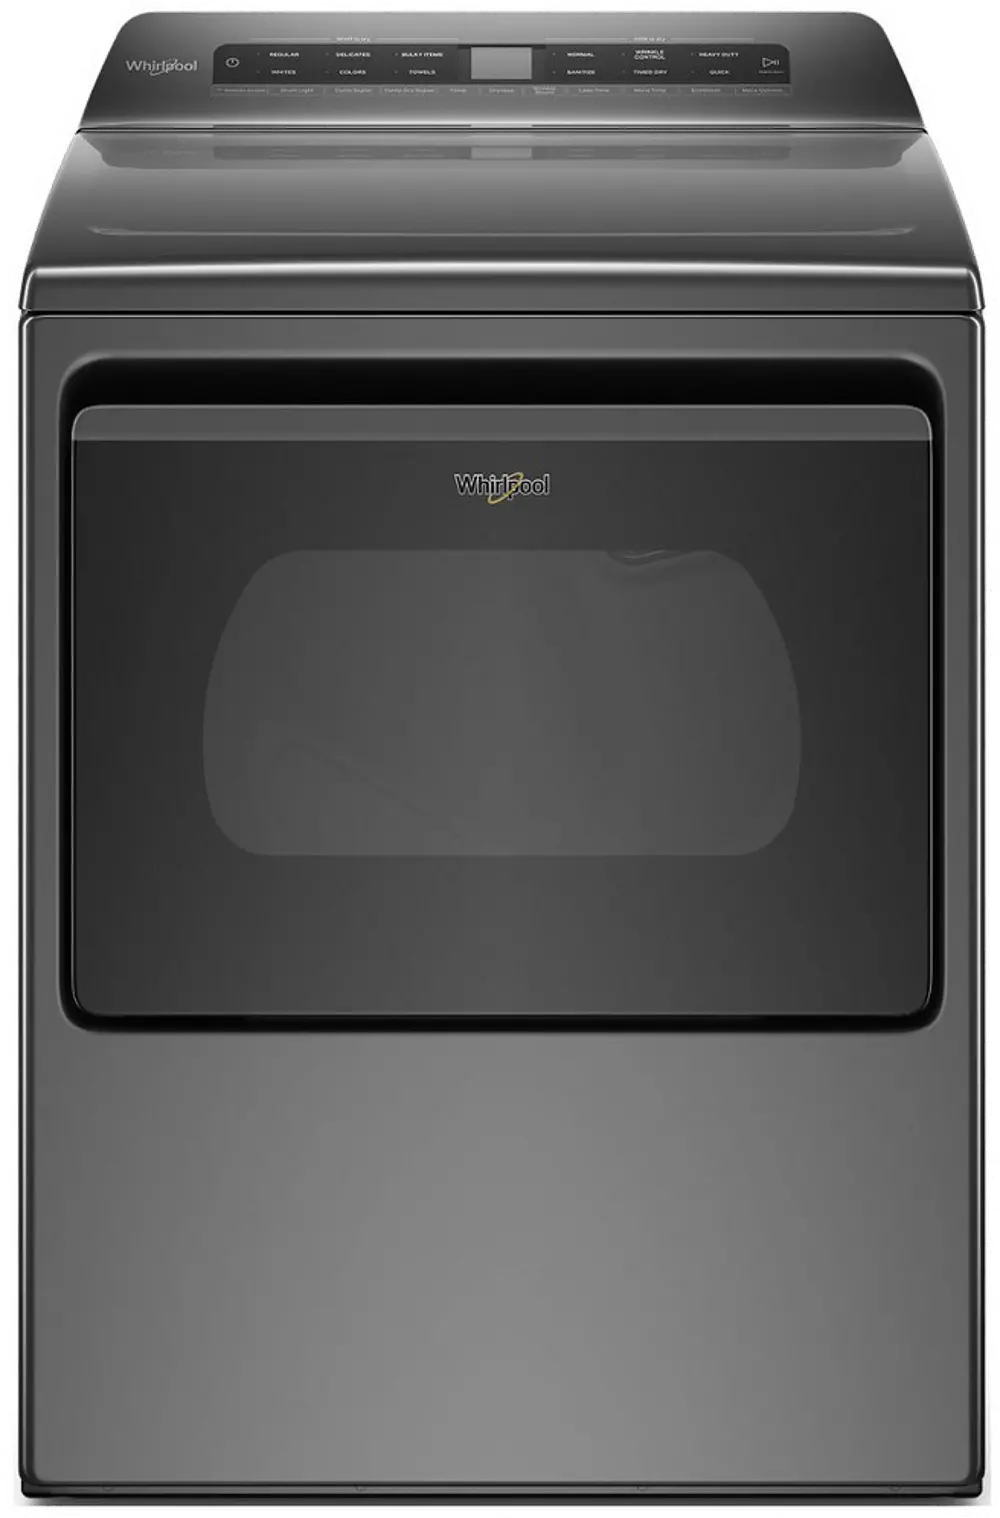 WED6120HC Whirlpool Smart Capable Electric Dryer with Quick Dry - 7.4 cu. ft. Chrome Shadow-1